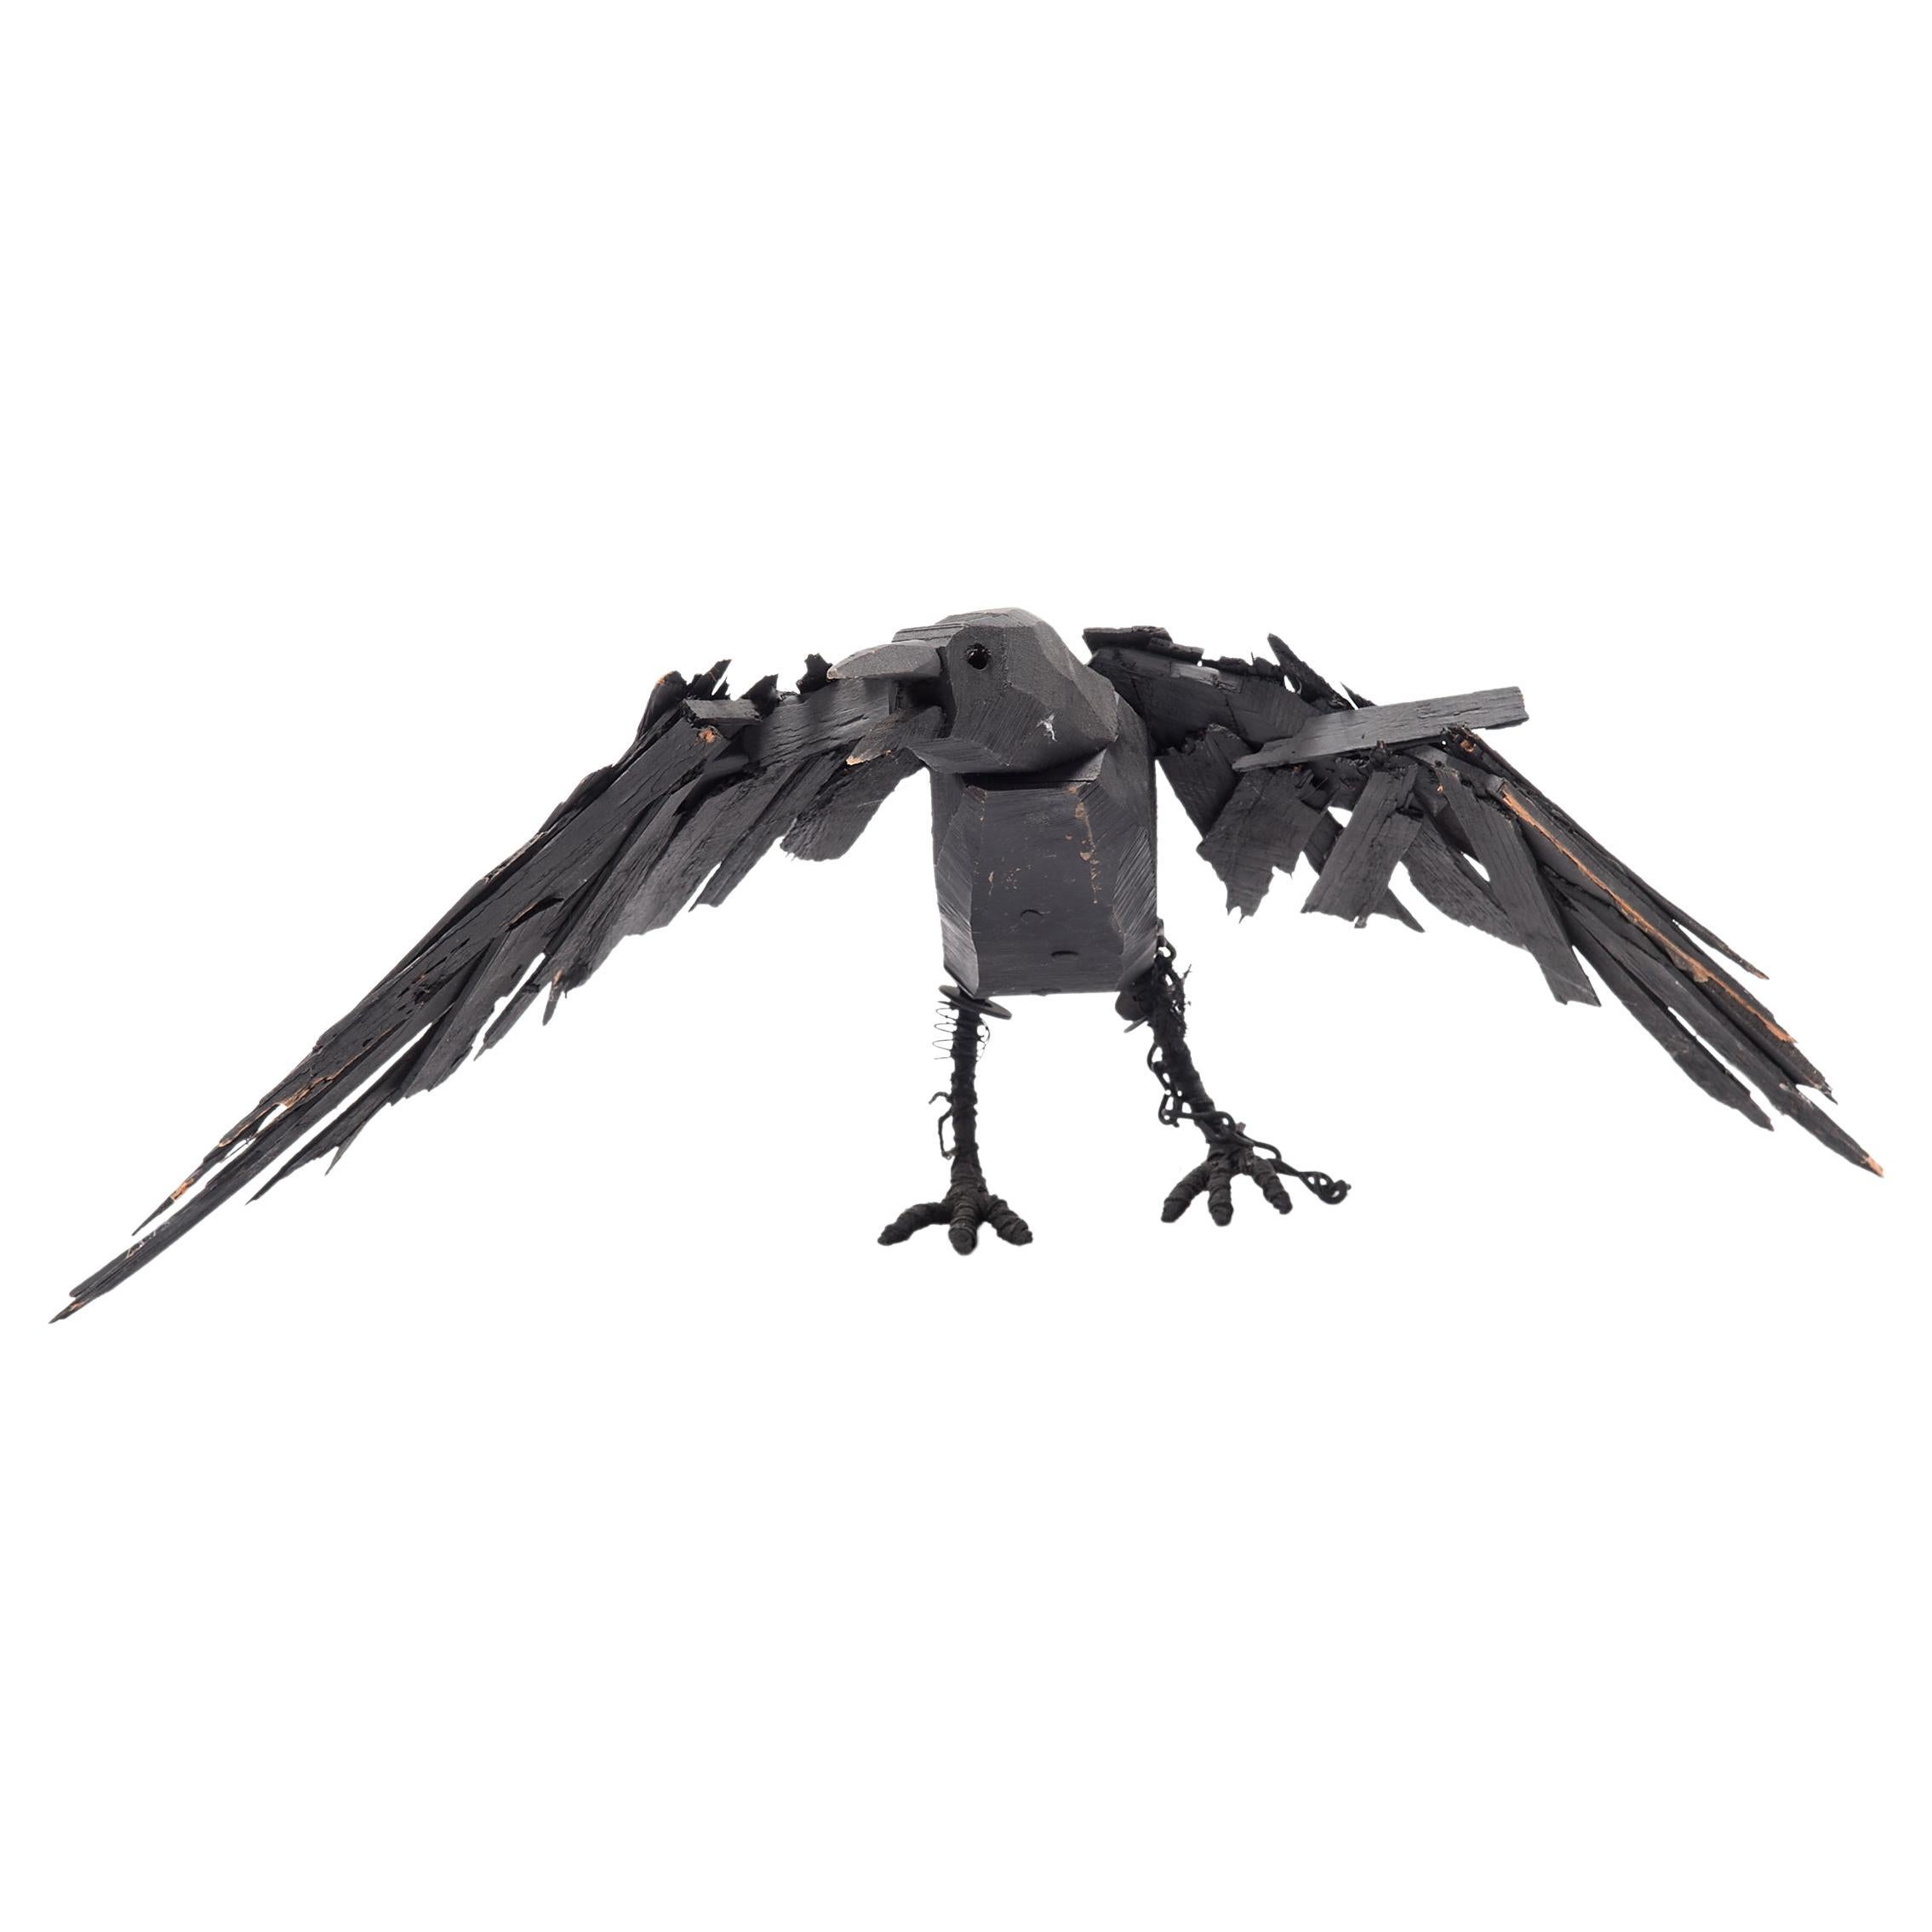 "Protector One" Folk Art Crow Sculpture For Sale